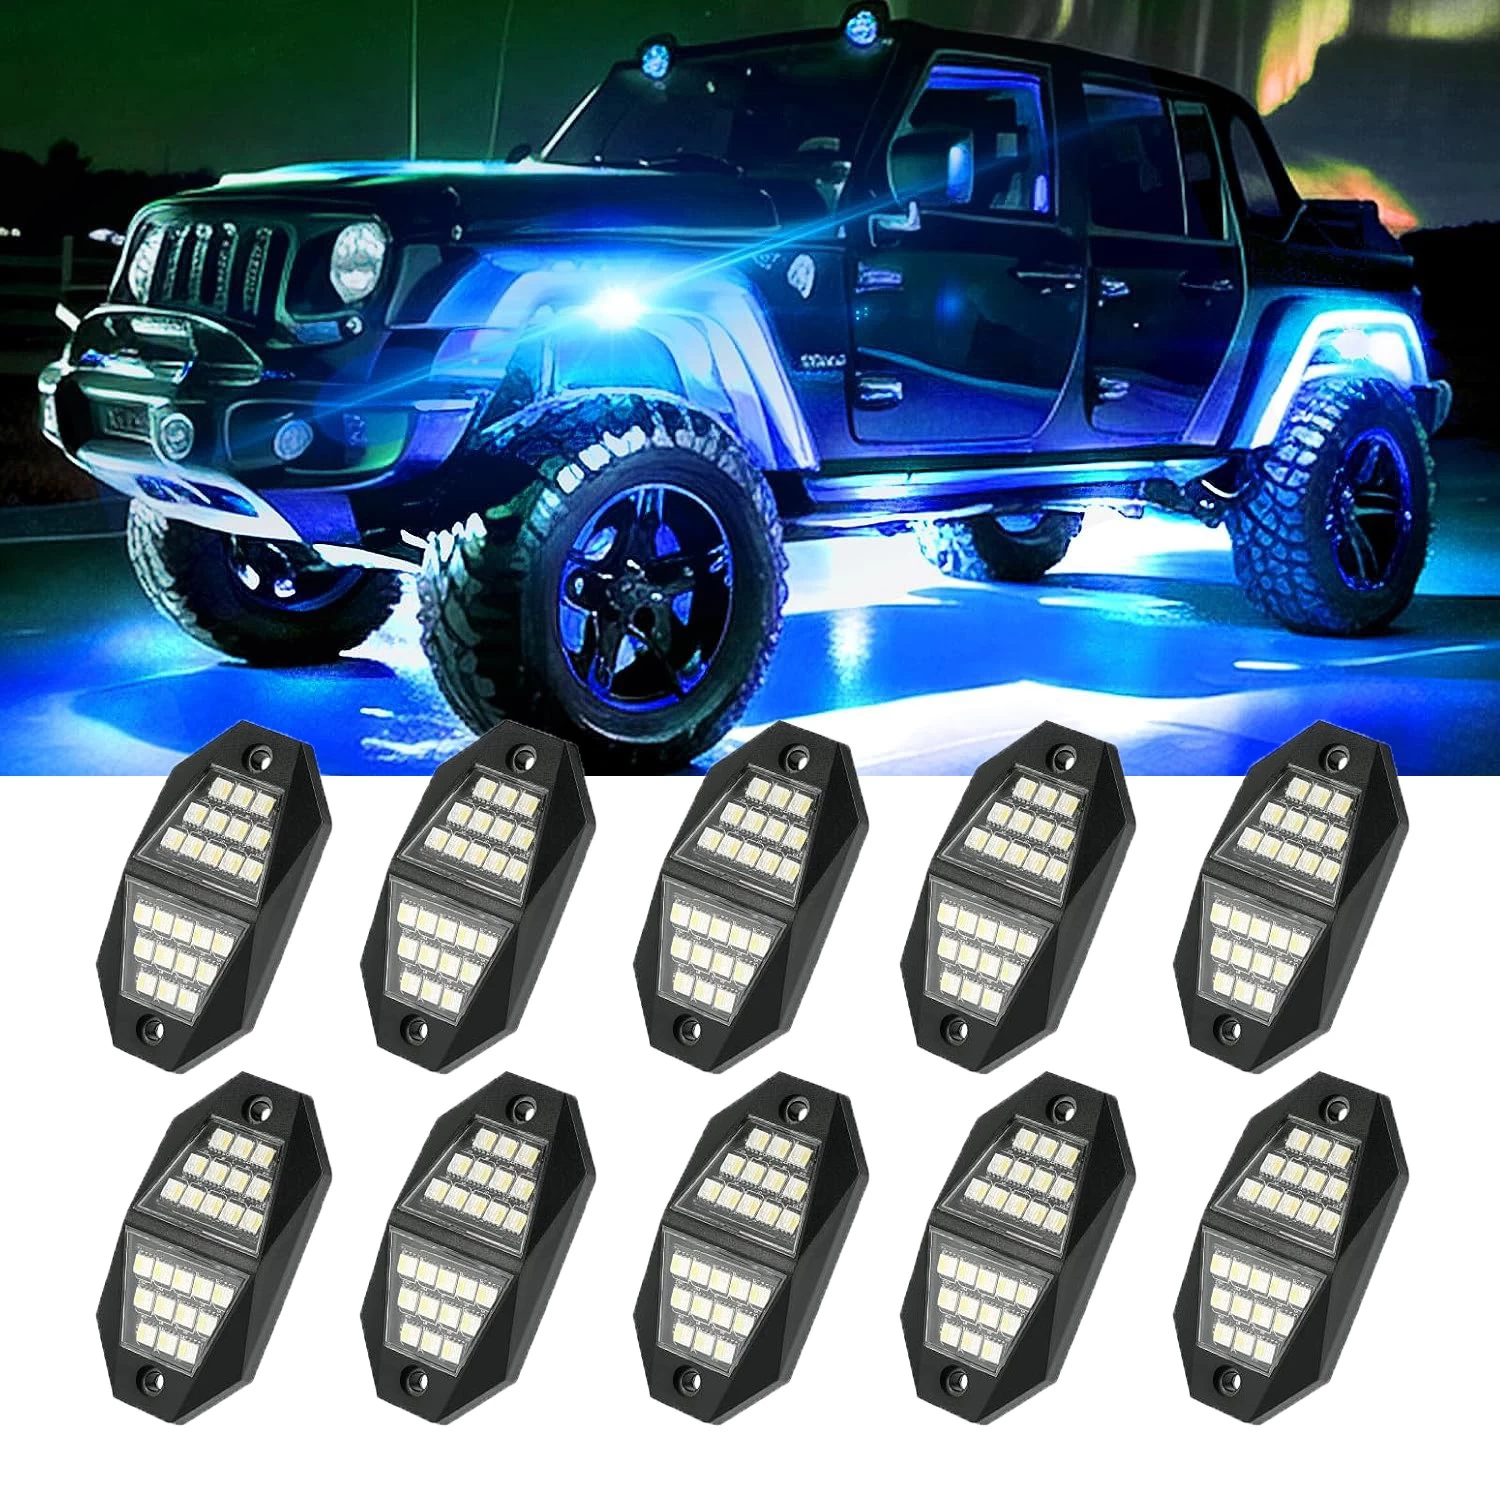 5 Sides LED Rock Lights 8 Pods Multicolor Underglow Lights for Trucks with App Control Flashing Music Mode RGB Rock Lights for Boat SUV Car Accessories - COPY - lf3jlu